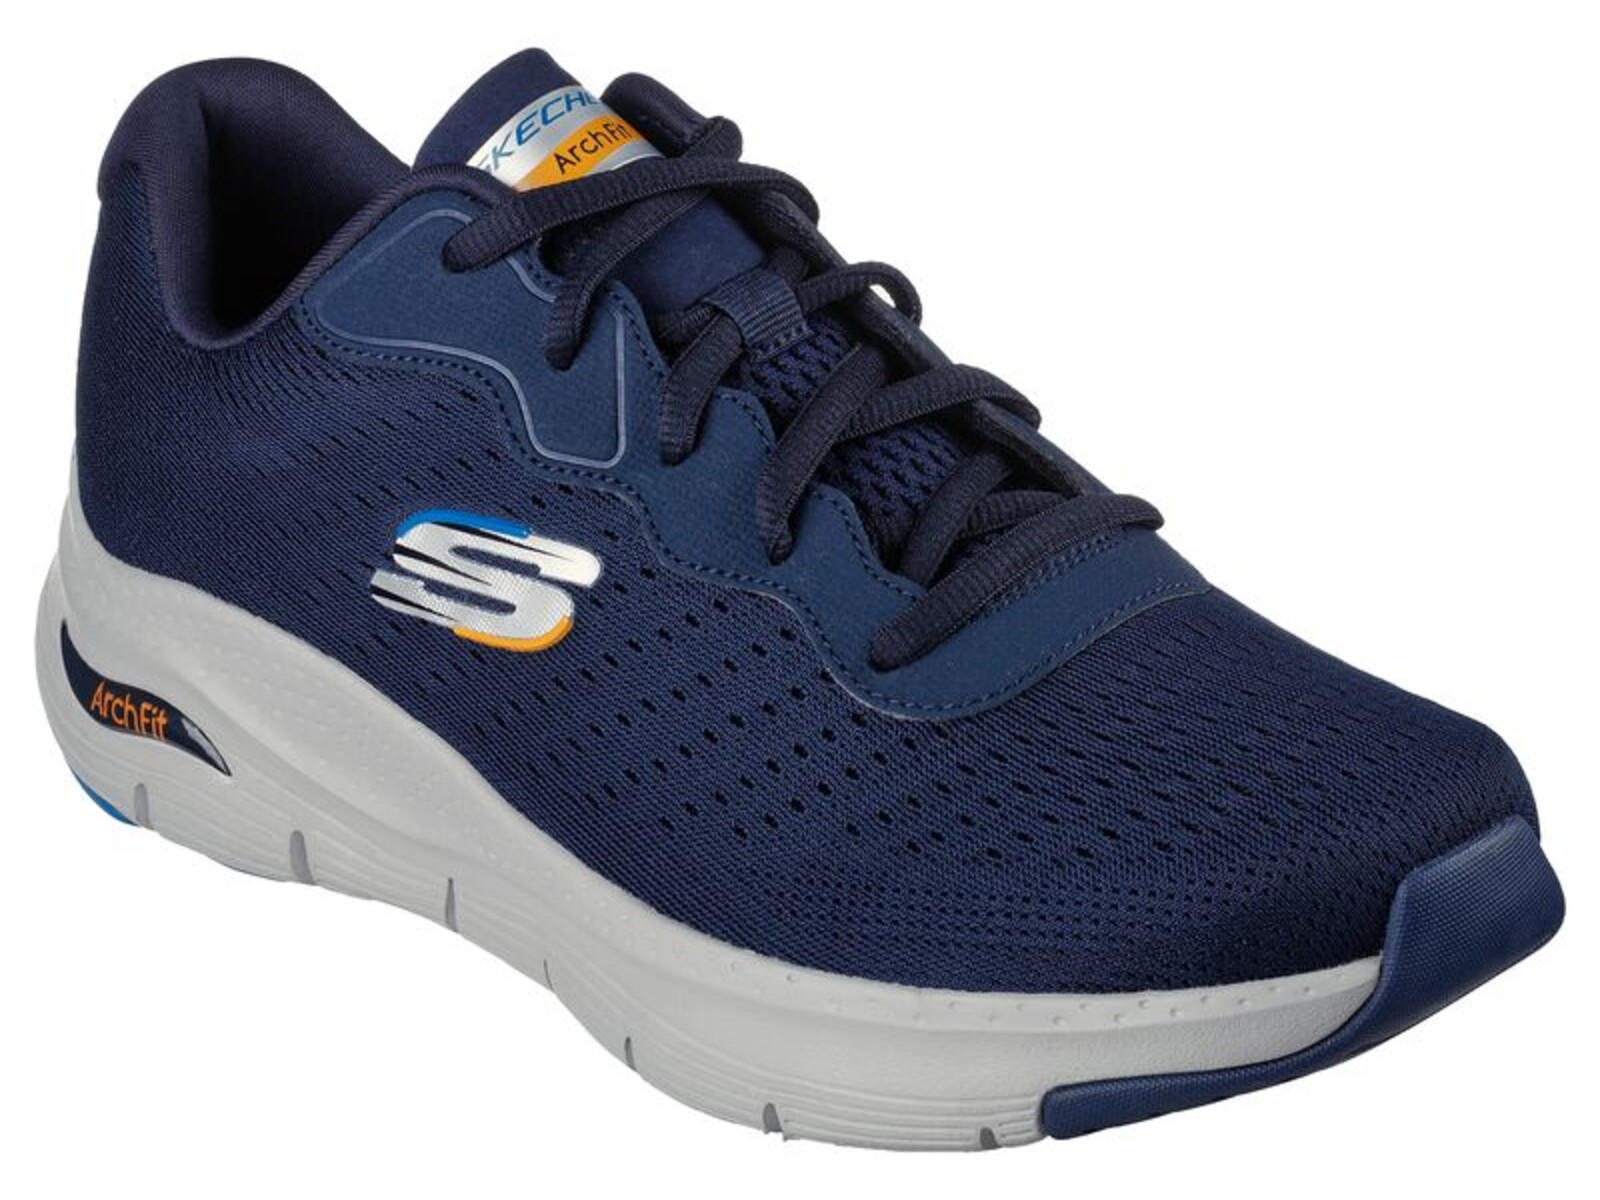 Mens Skechers Arch Fit - Infinity Cool